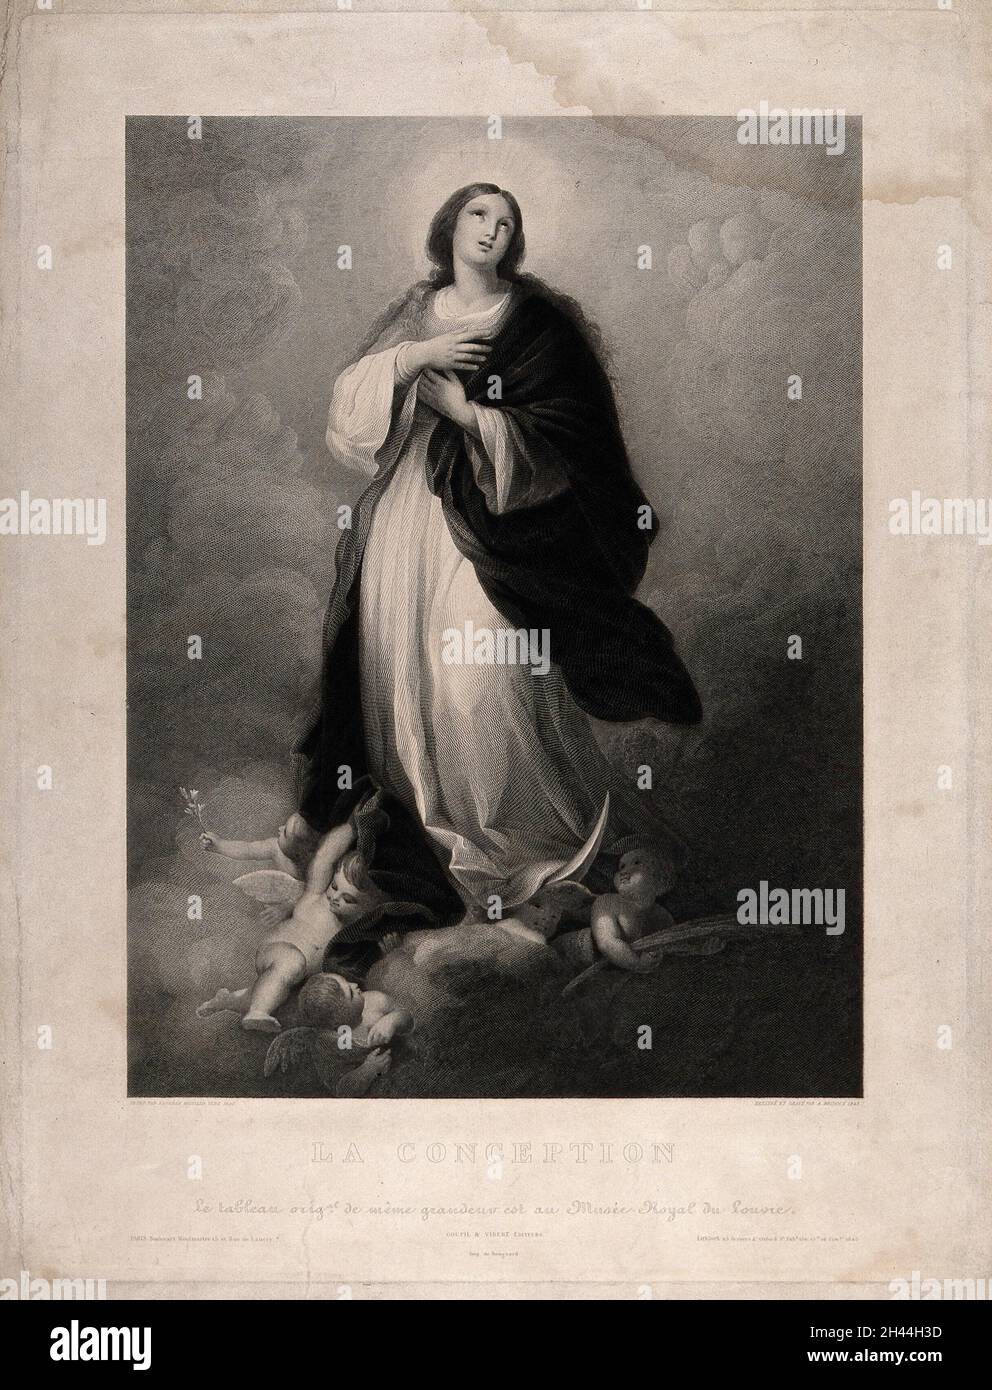 The Virgin Mary, immaculately conceived, descends from heaven, a sickle moon beneath her feet. Engraving by F-E-A. Bridoux, 1845, after B.E. Murillo, ca. 1650. Stock Photo